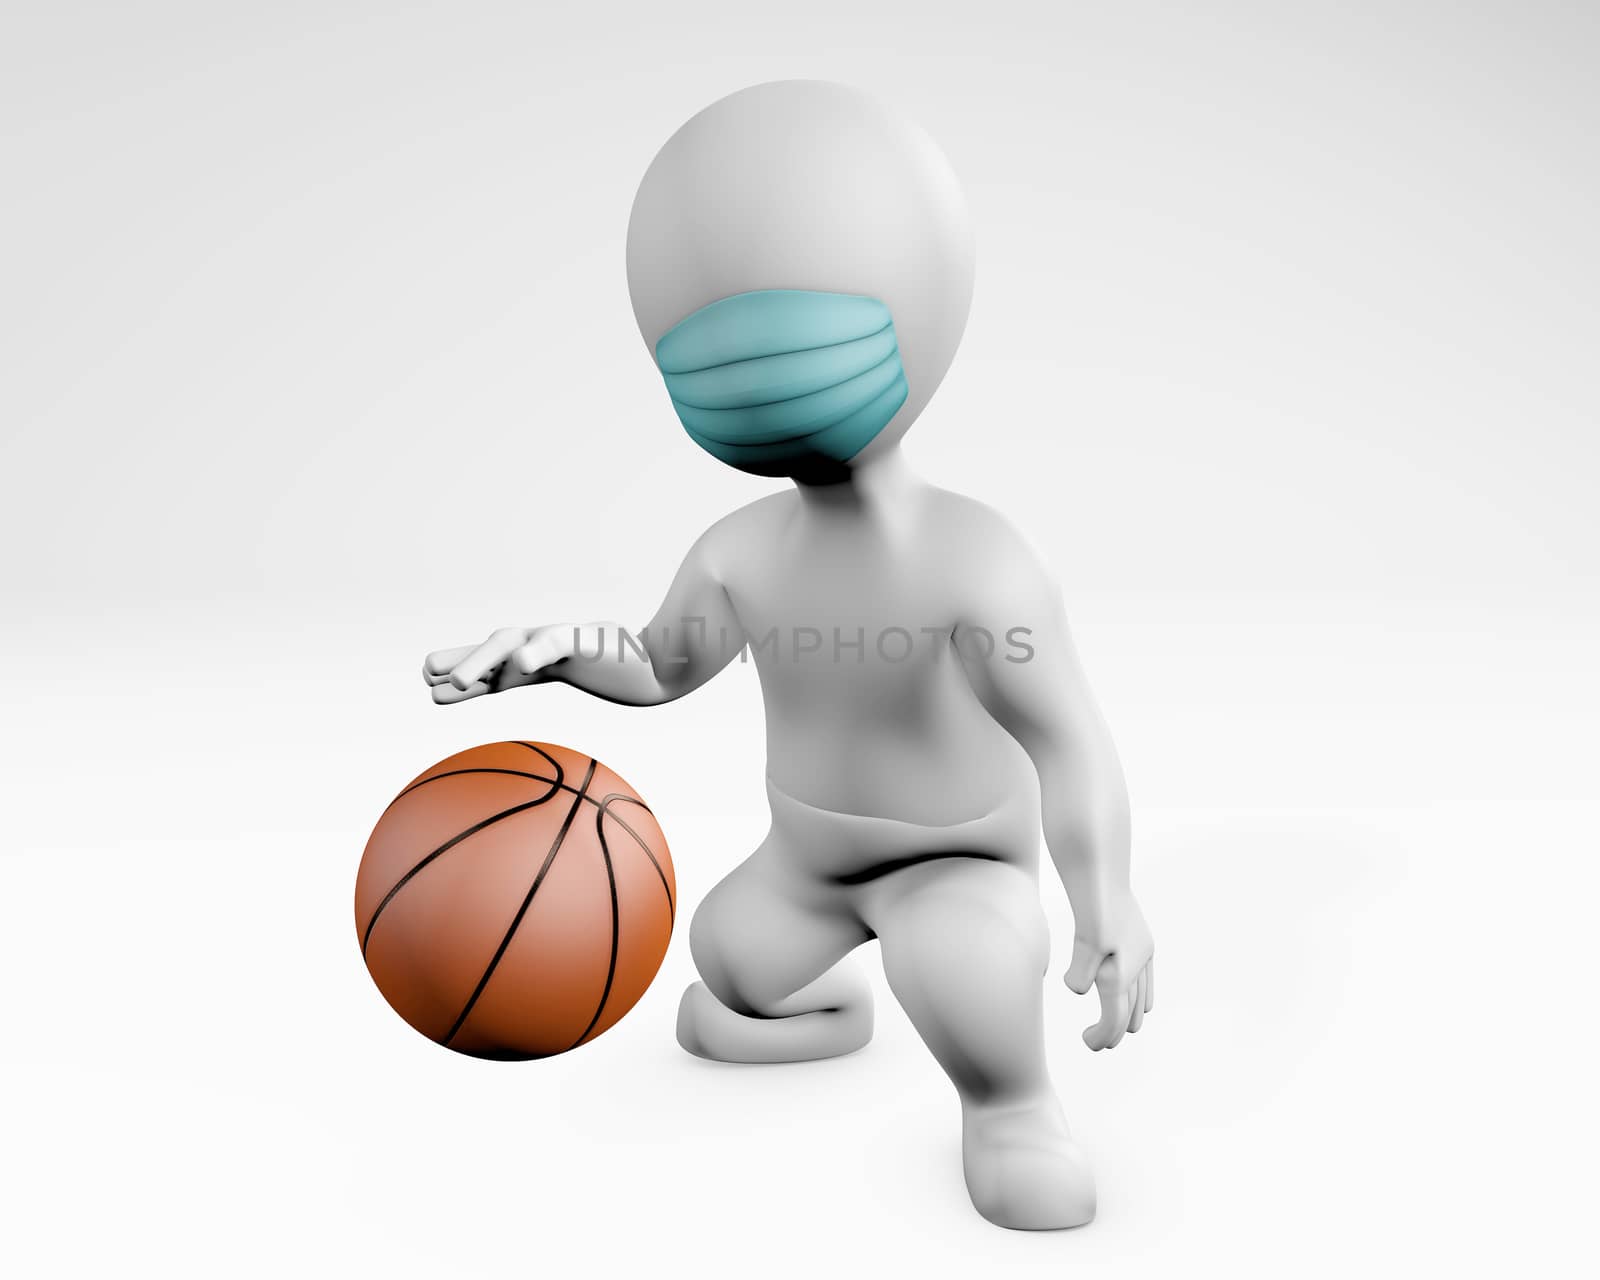 Fatty man with a mask playing basketball, 3d rendering by F1b0nacci